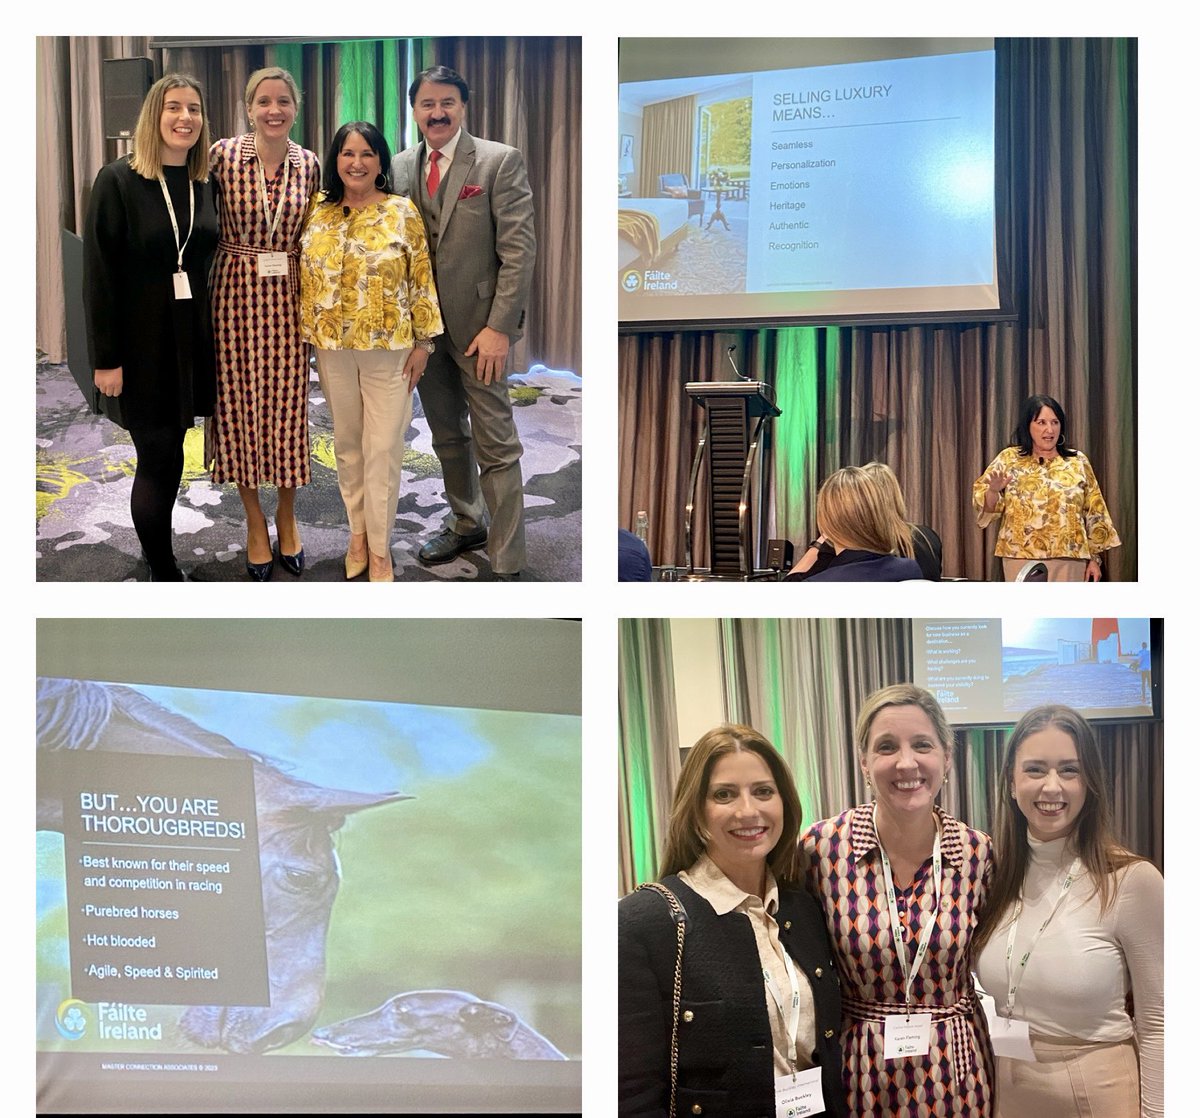 Excellent day of learning and meeting our @CashelPalace industry friends at the @Failte_Ireland #MasterConnectionAssociates workshop at @thegibsonhotel today! #PalacePeopleOnTour #Tipperary